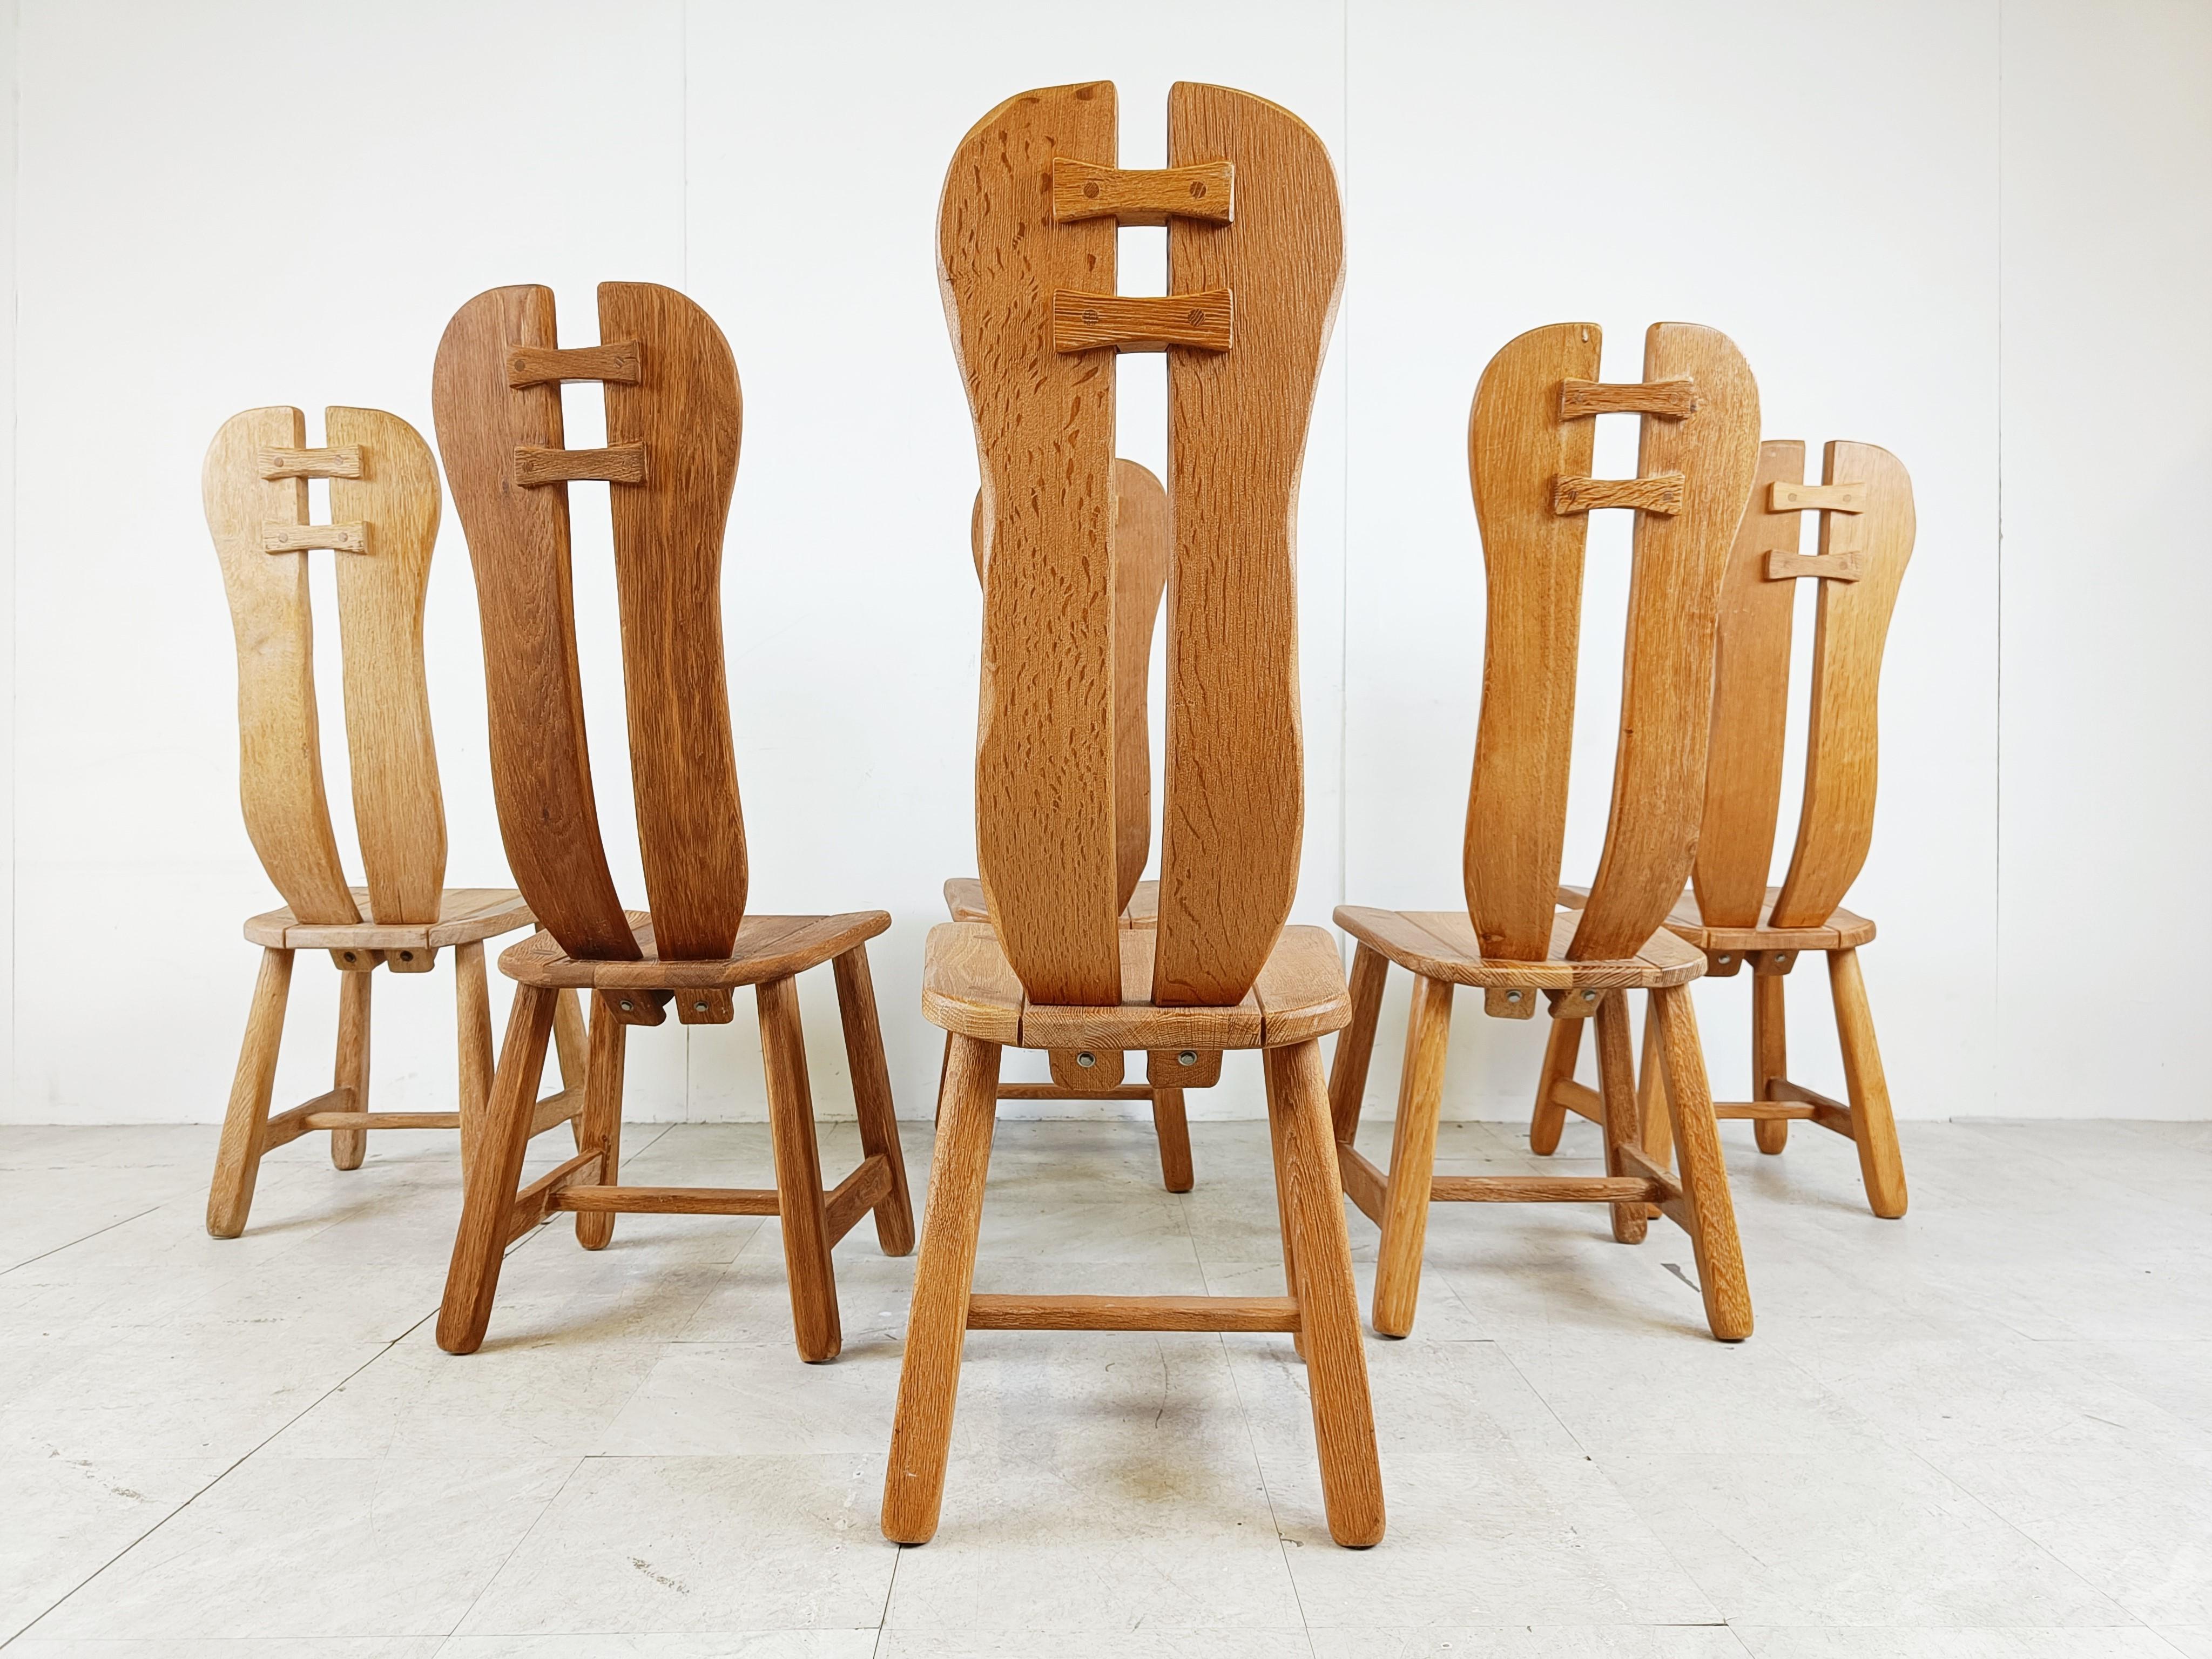 Oak Vintage Dining Chairs by Depuydt, Belgium, 1960s For Sale